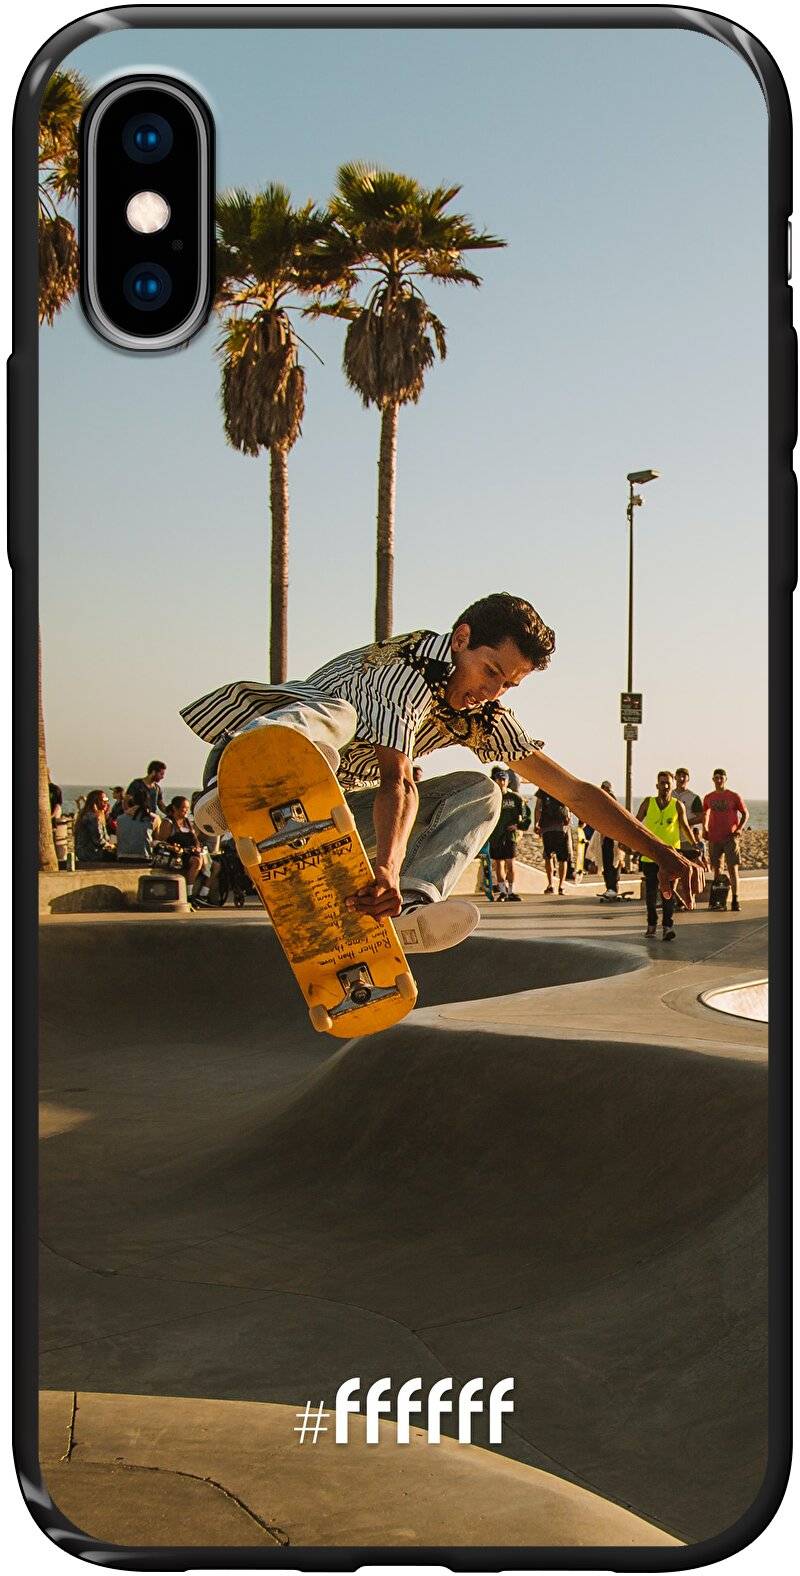 Let's Skate iPhone Xs